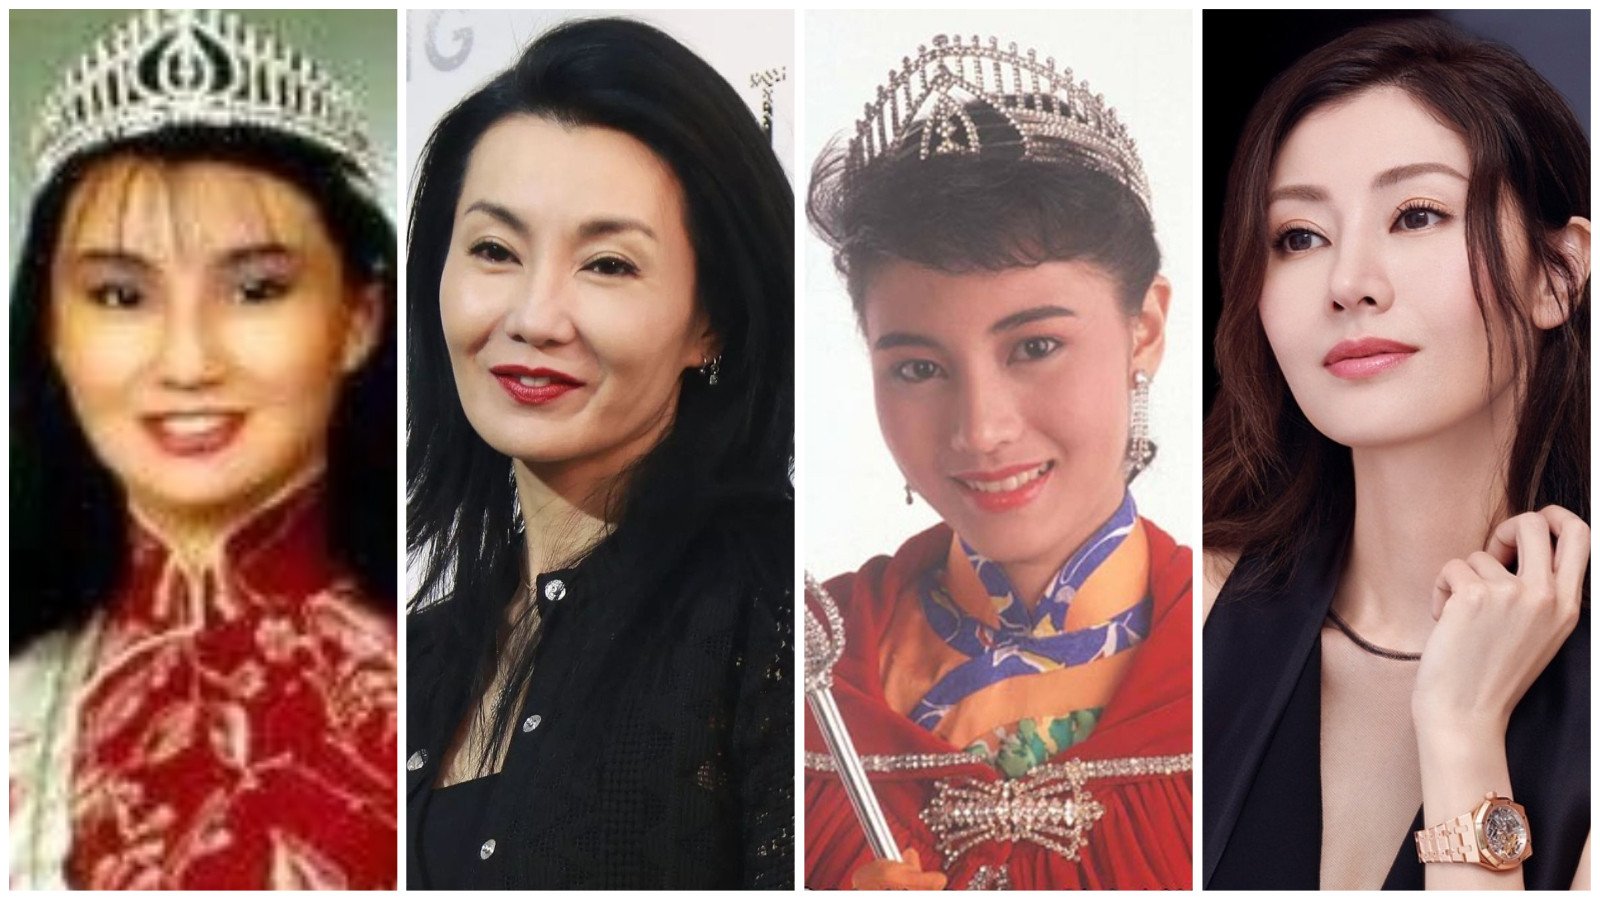 From Maggie Cheung to Michele Reis, these Miss Hong Kong beauty pageant contestants went on to become major actresses. Photos: hk.aboluowang.com, @zhangmanyuofficial, @michele_monique_reis/Instagram